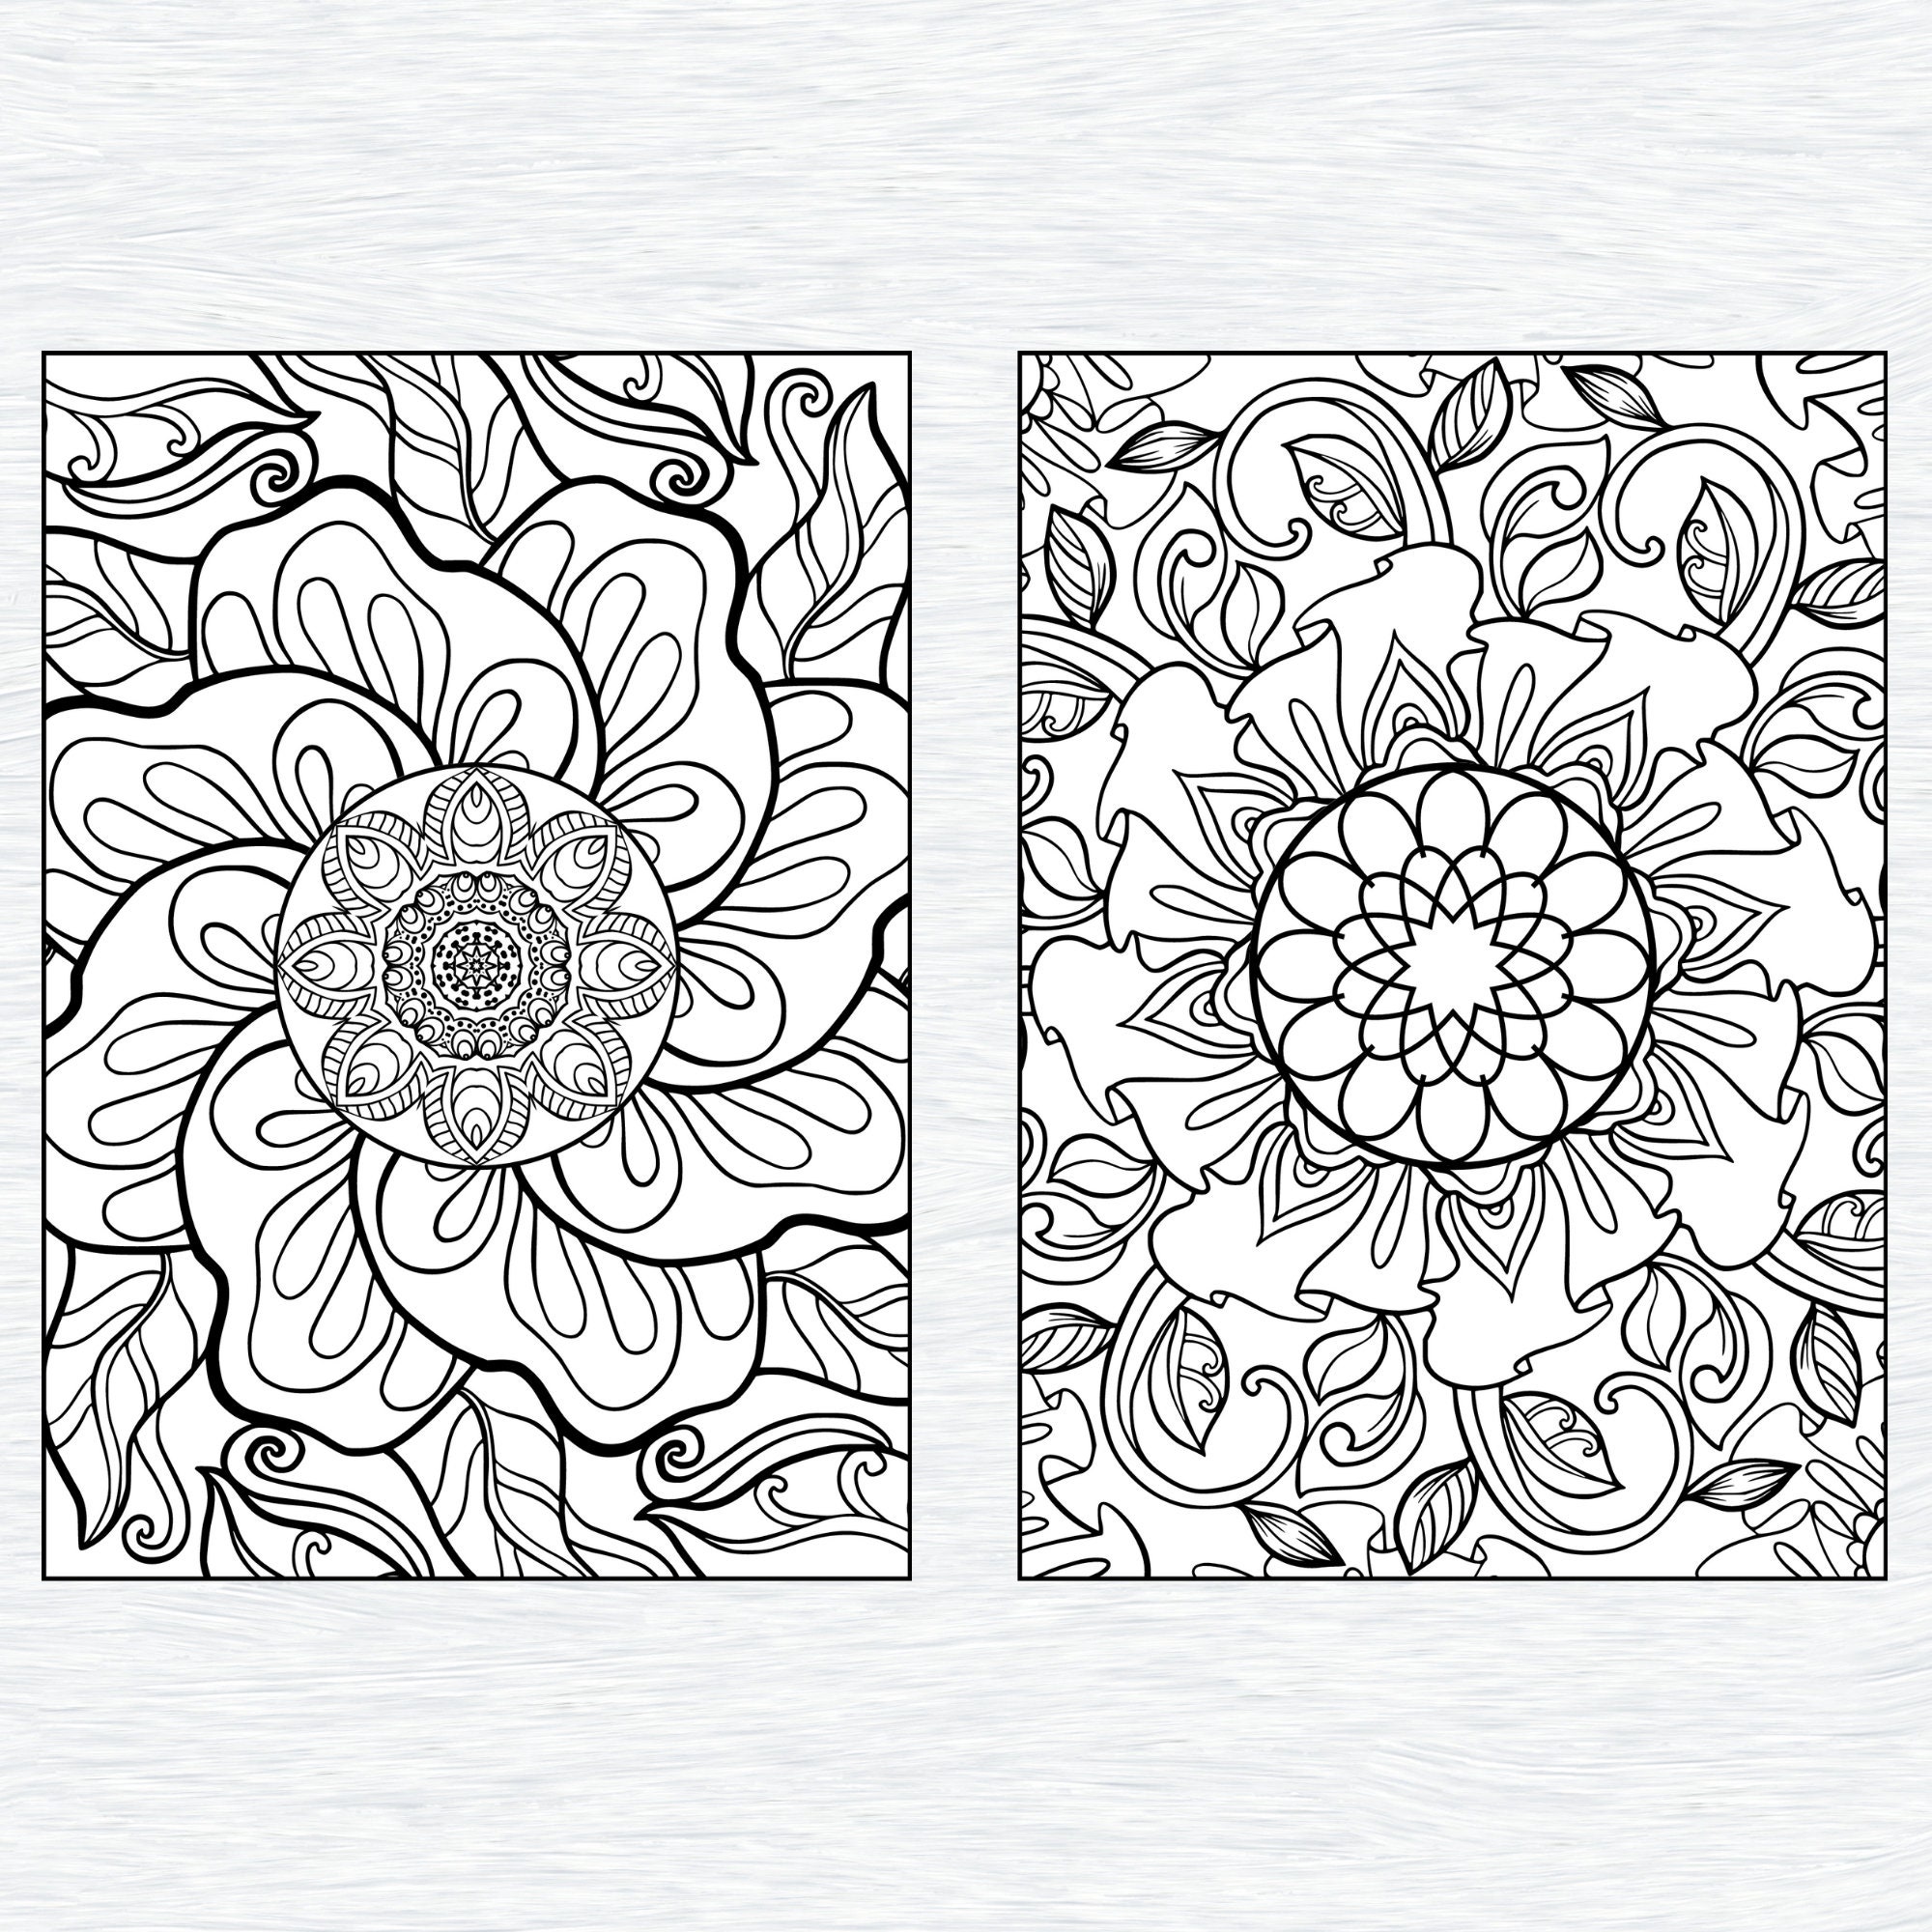 Flower Mandala Coloring Pages for Adults, 25 Amazing Mandala Coloring Pages  for Creative Thinkers, Relaxing Mandala Adult Coloring Book 